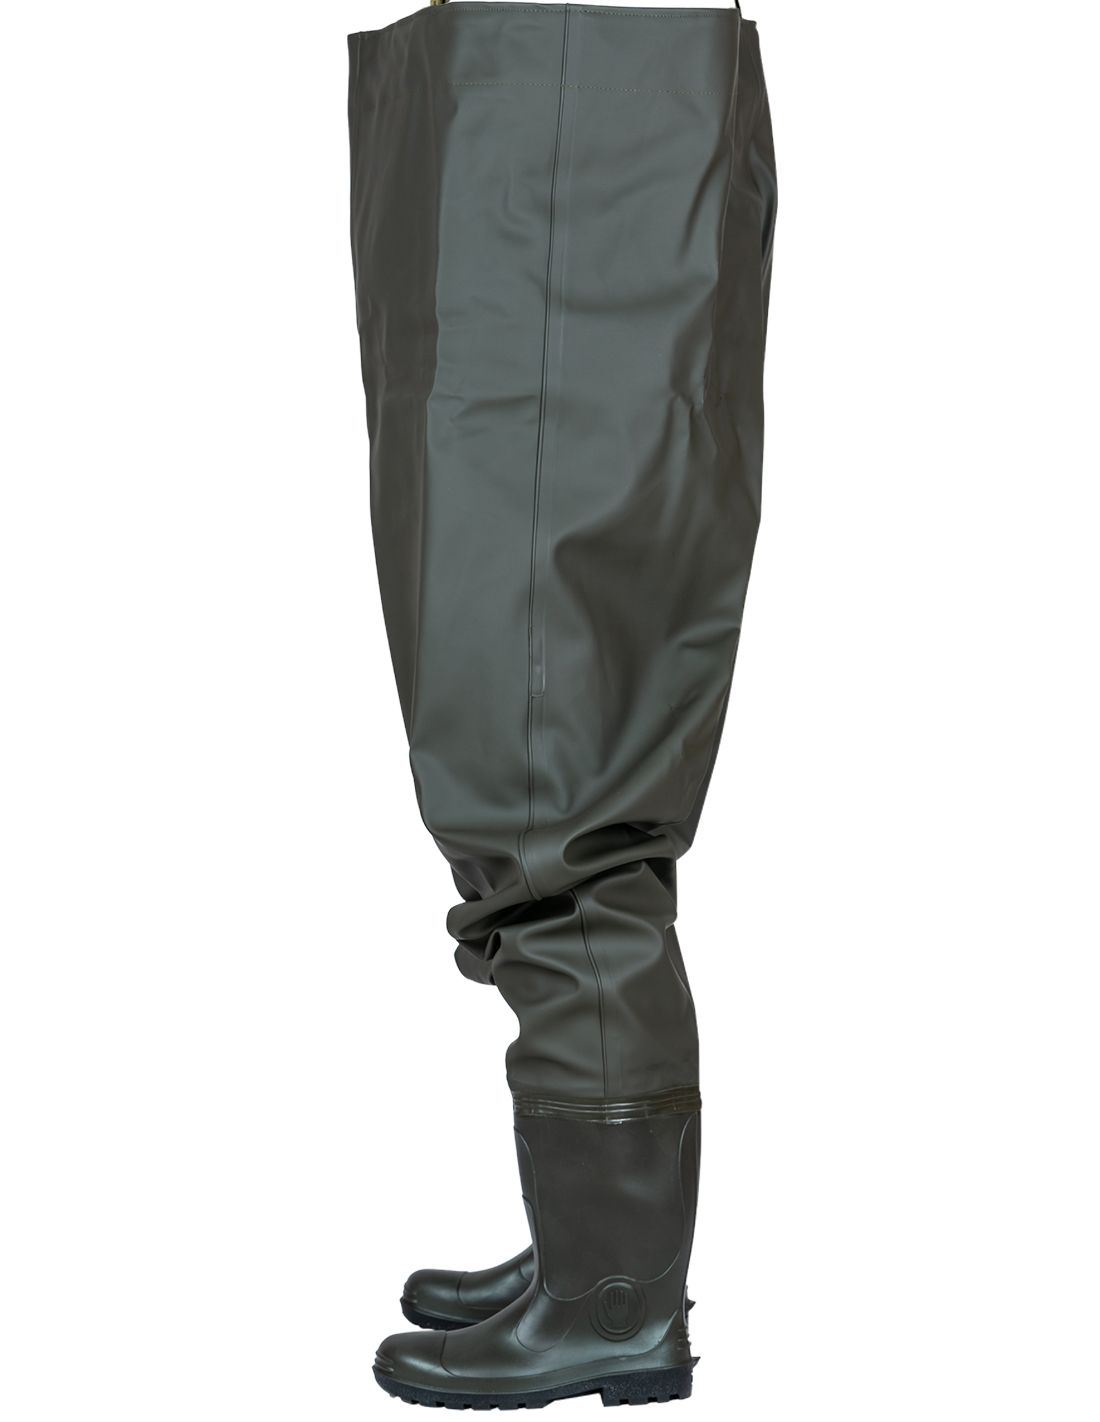 Chest Waders - PROS